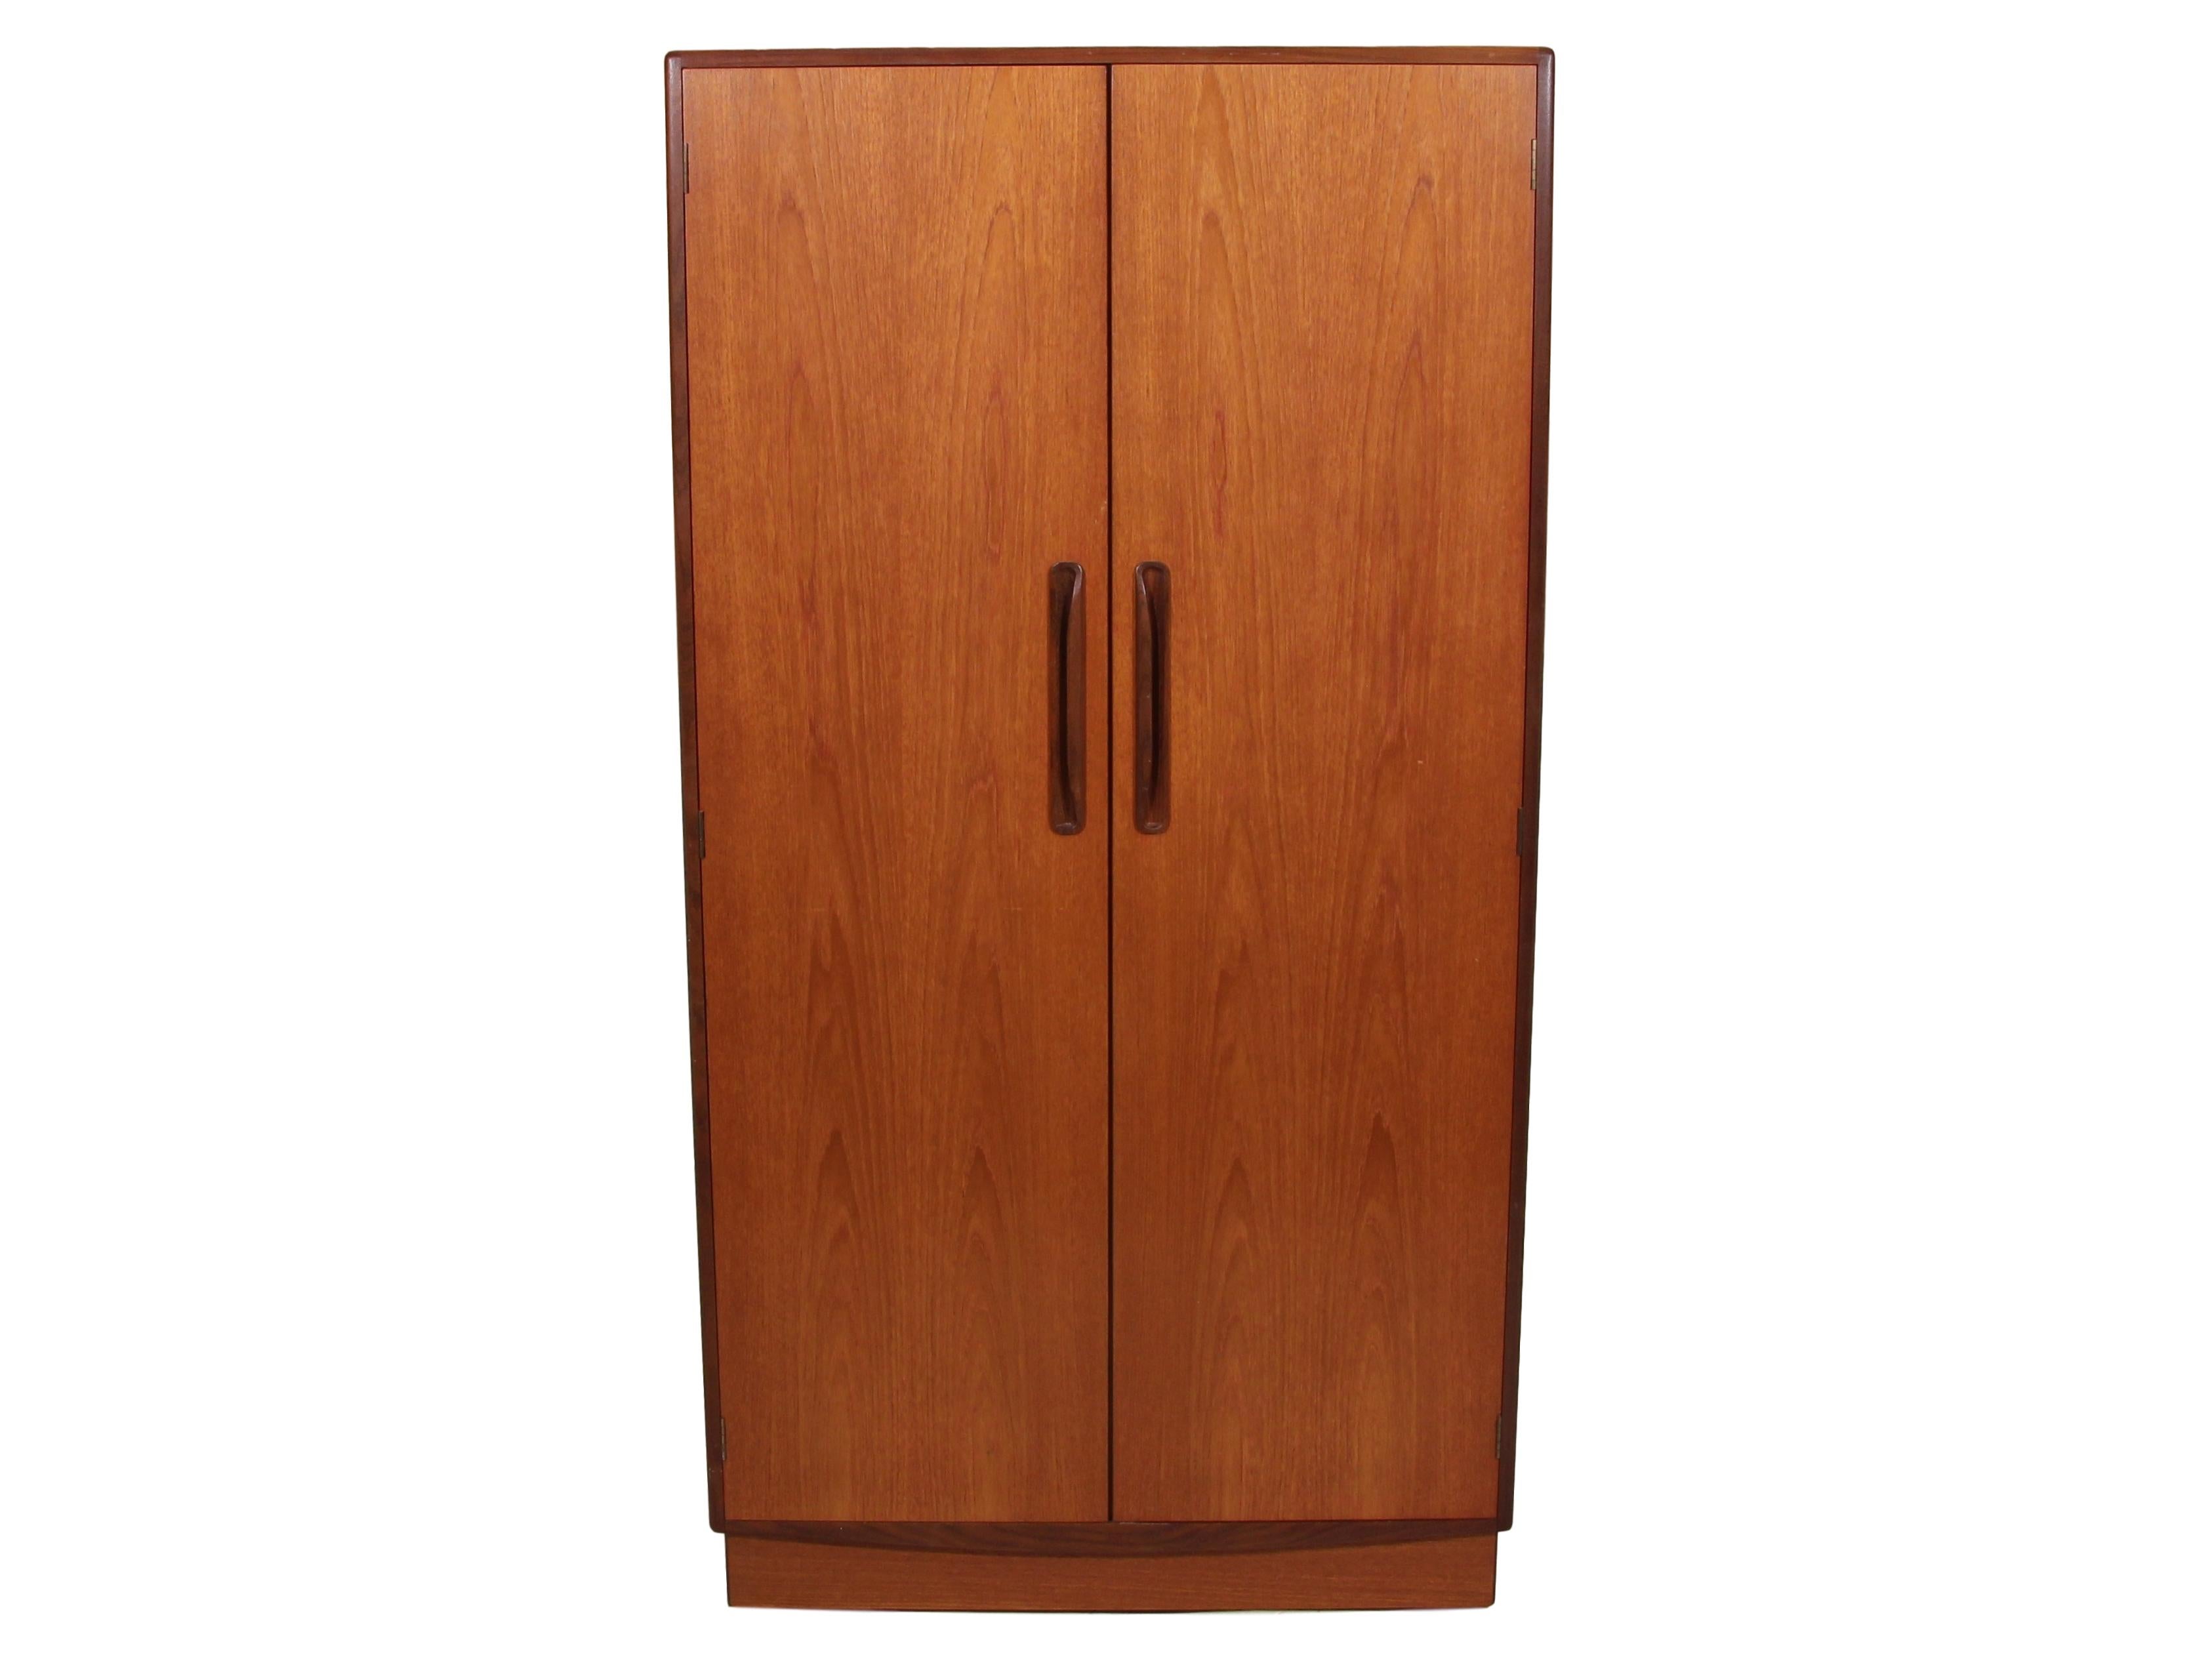 Teak wardrobe by G Plan. Designed in the 1960s by Victor Bramwell Wilkins for G Plan's Fresco Range. Danish modern in style.
Two-door wardrobe with half hanging space on the left side and shelves and drawer space on the right. Stunning grain